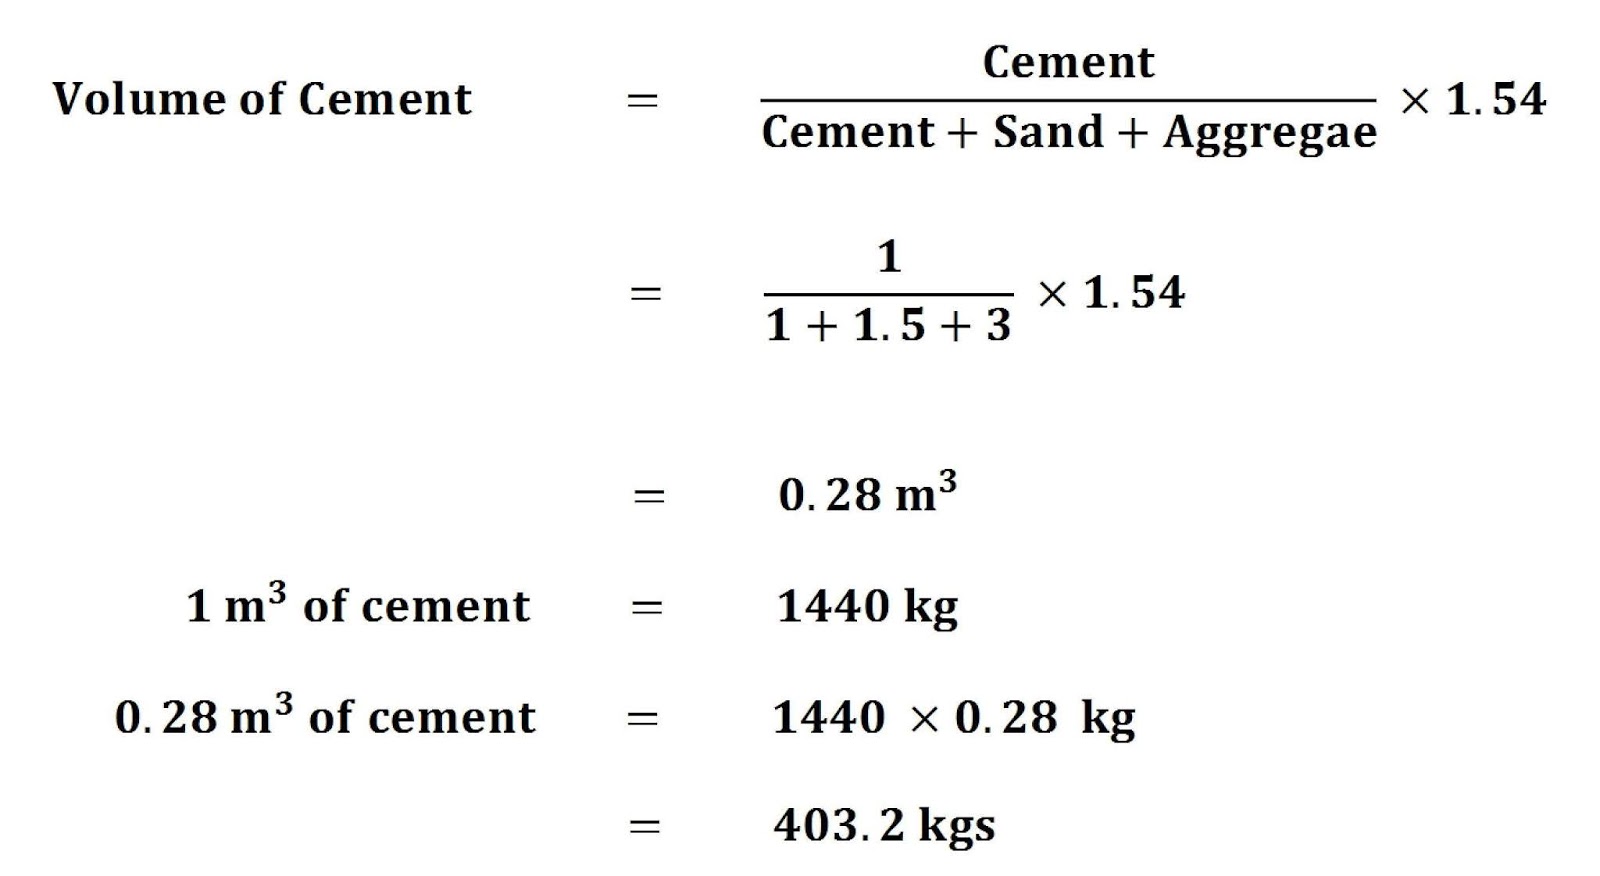 How to calculate cement sand and aggregate quantity in concrete